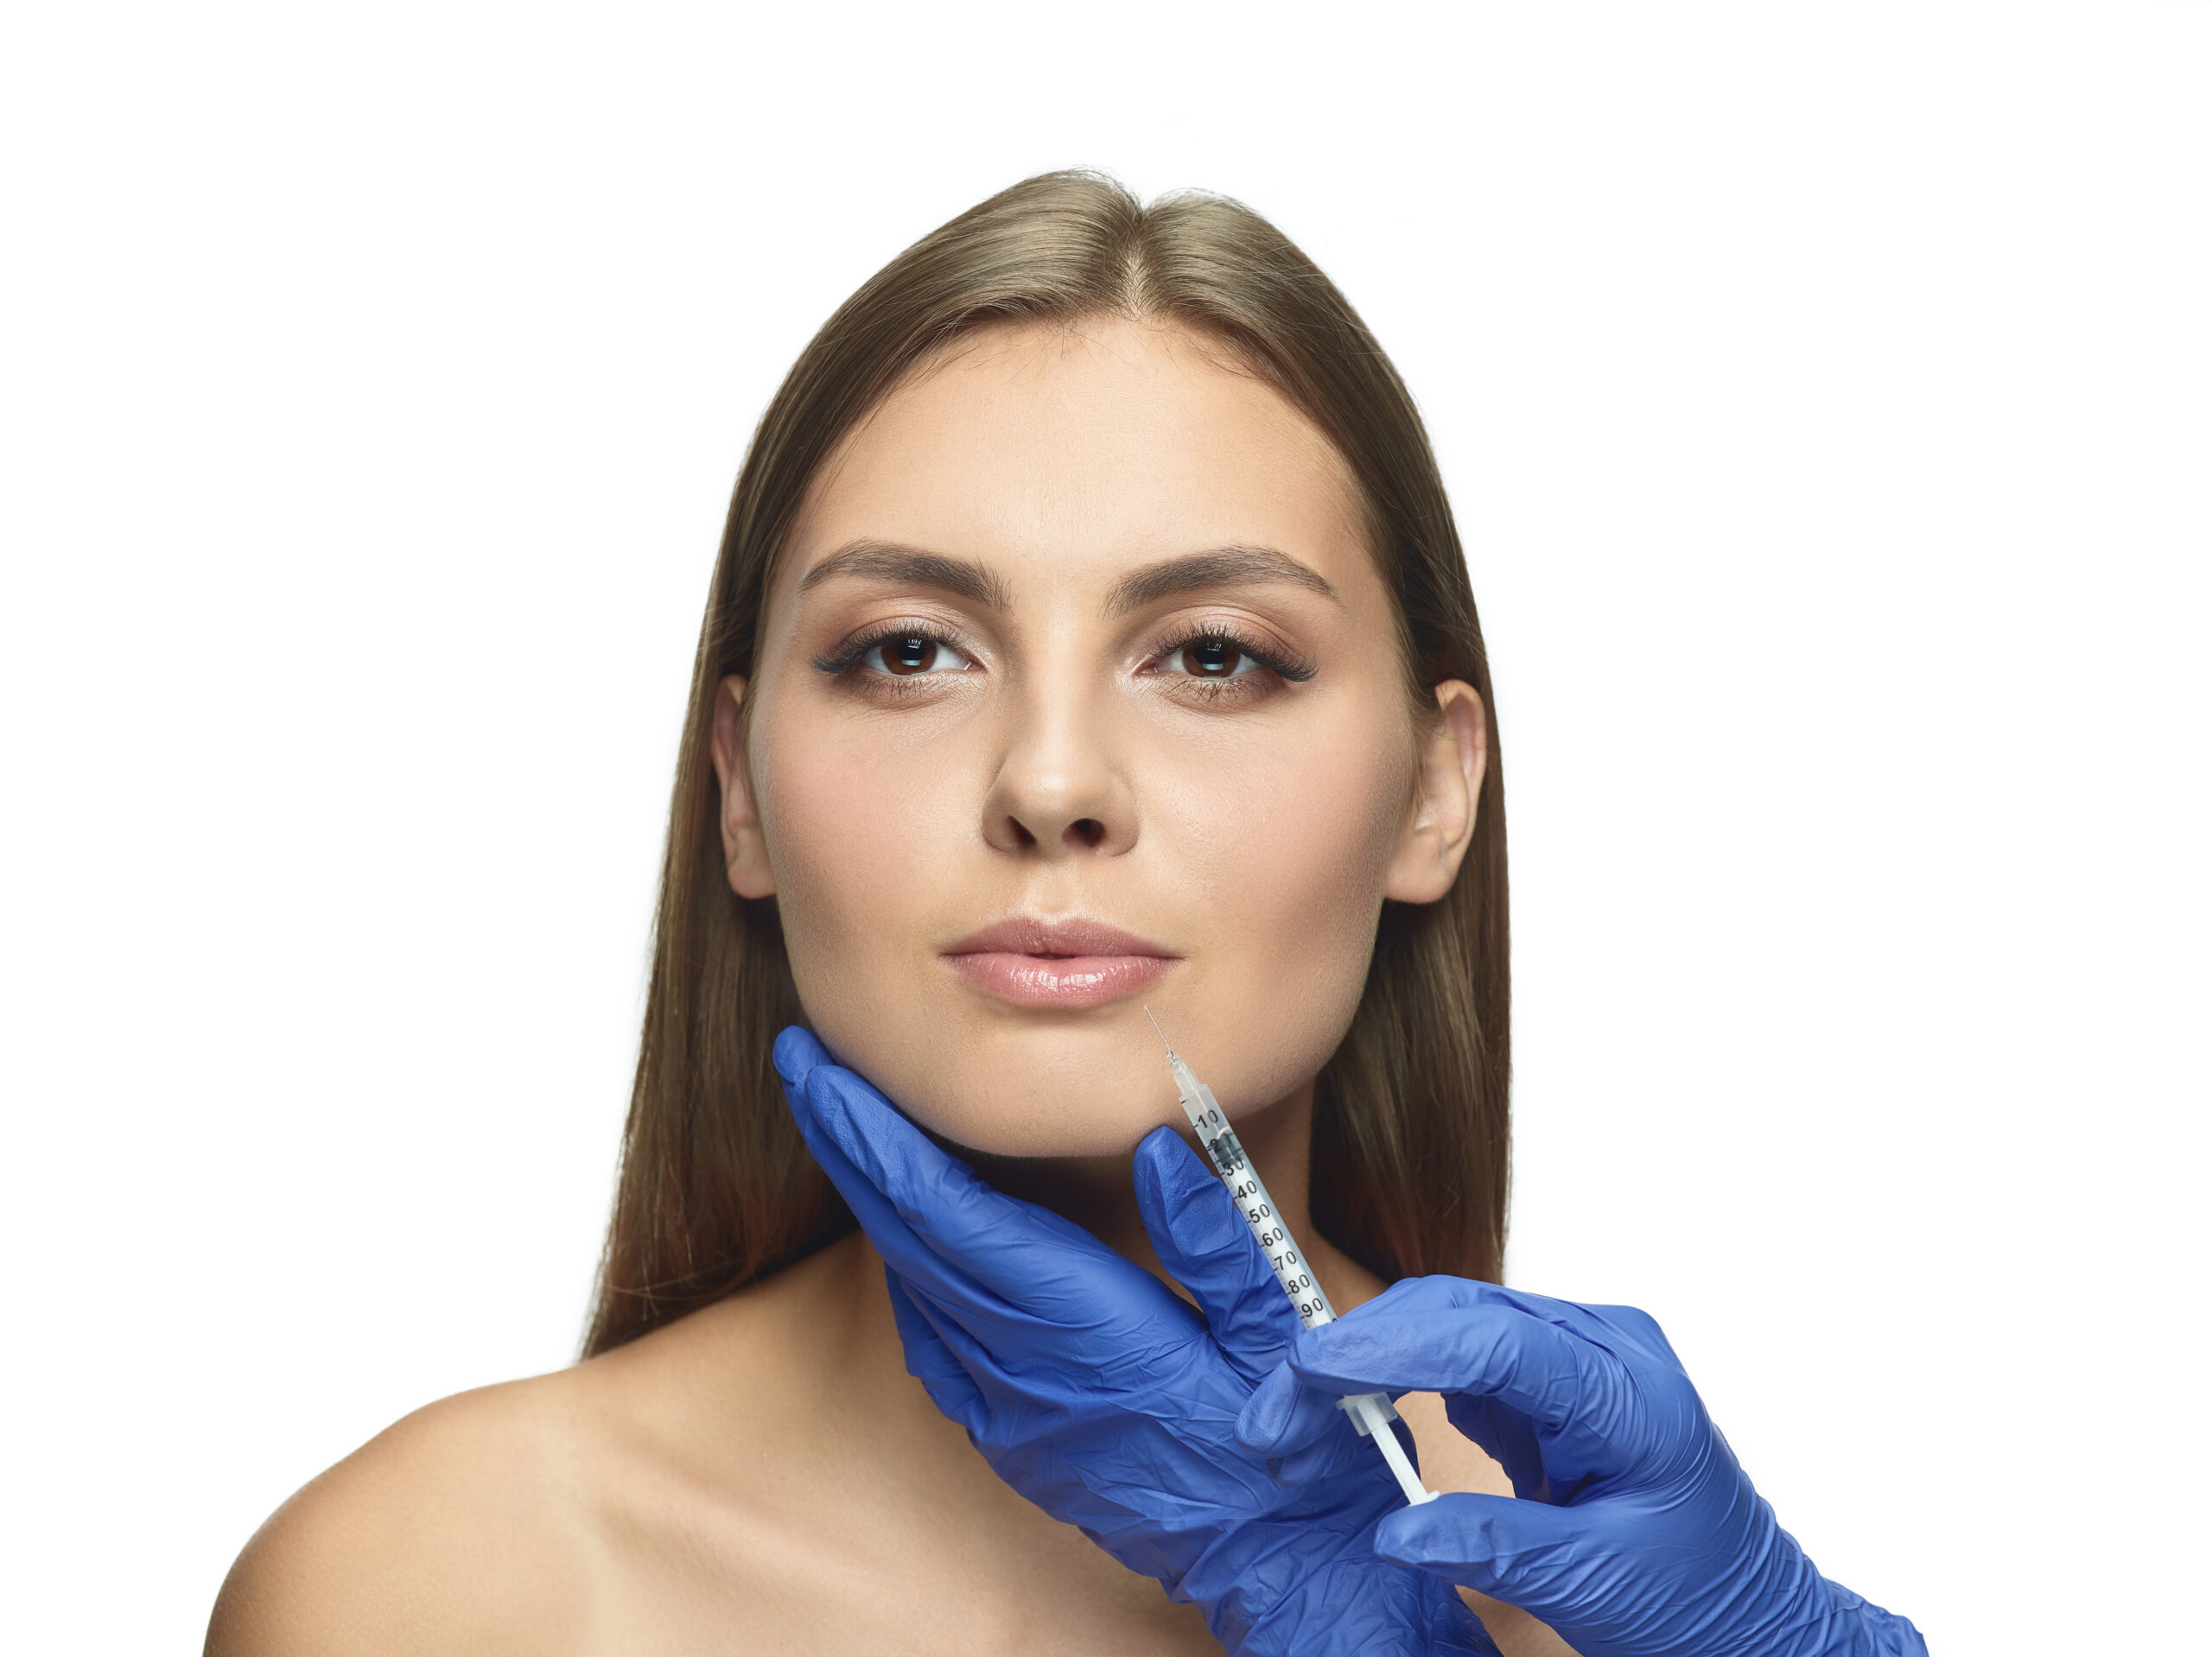 Close-up portrait of young woman on white studio background. Filling surgery procedure. Lip augmentation. Concept of women's health and beauty, cosmetology, self-care, body and skin care. Anti-aging.